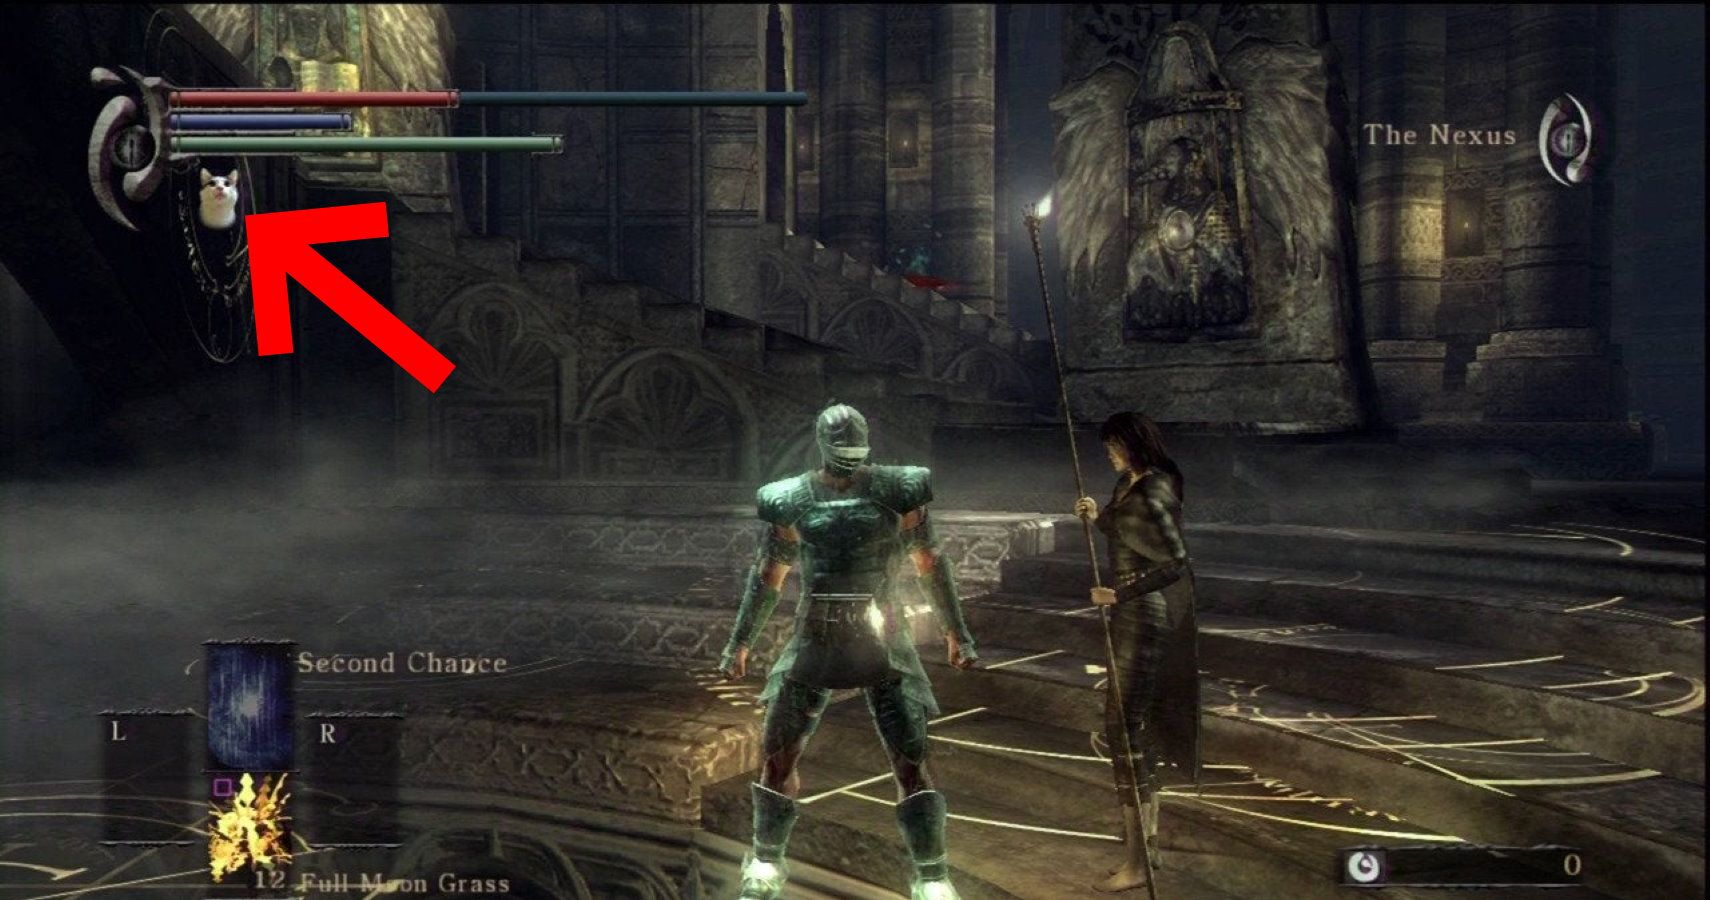 Bluepoint Could Be Really Doing That Demon's Souls Remake for PS5